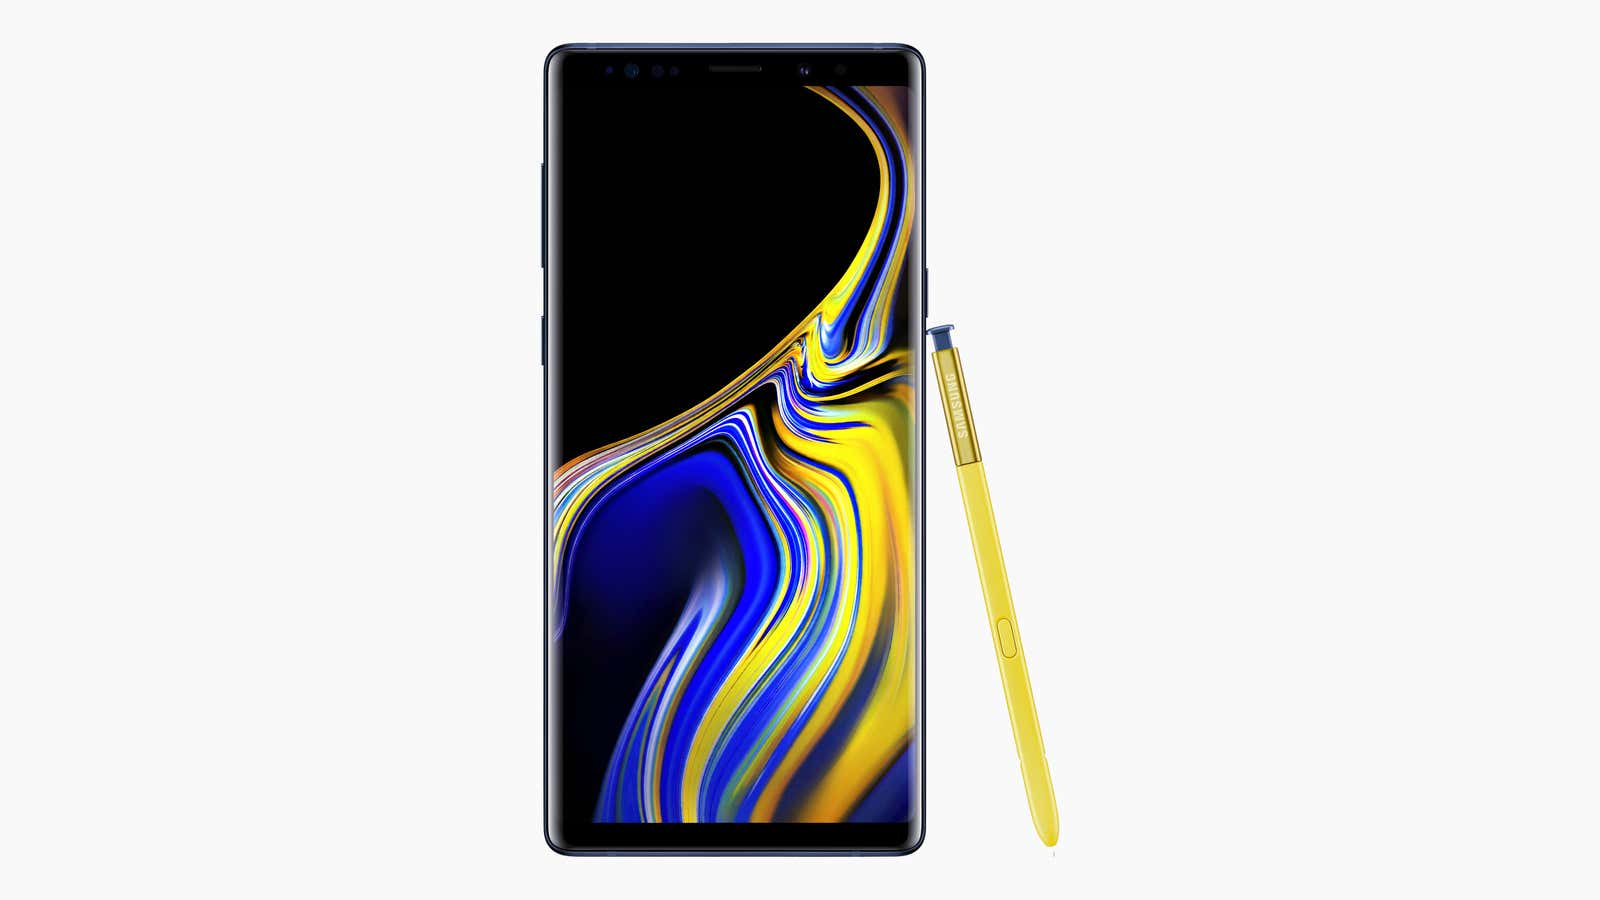 The Samsung Galaxy Note 9.